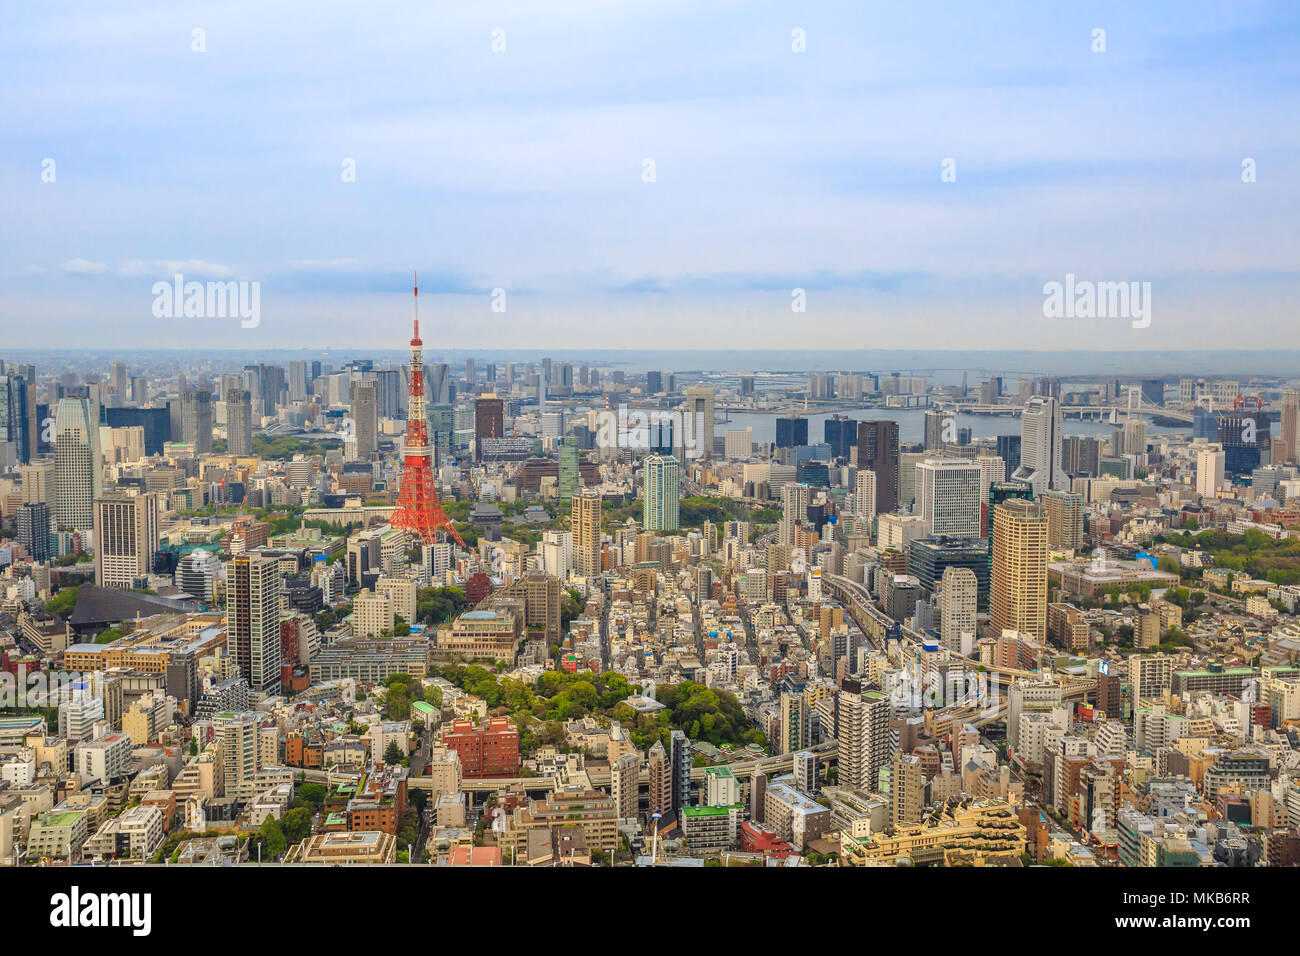 Aerial view of Tokyo Skyline at iconic Tokyo Tower from Mori Tower, the modern skyscraper and tallest building of Roppongi Hills complex in Minato District, Tokyo, Japan. Stock Photo